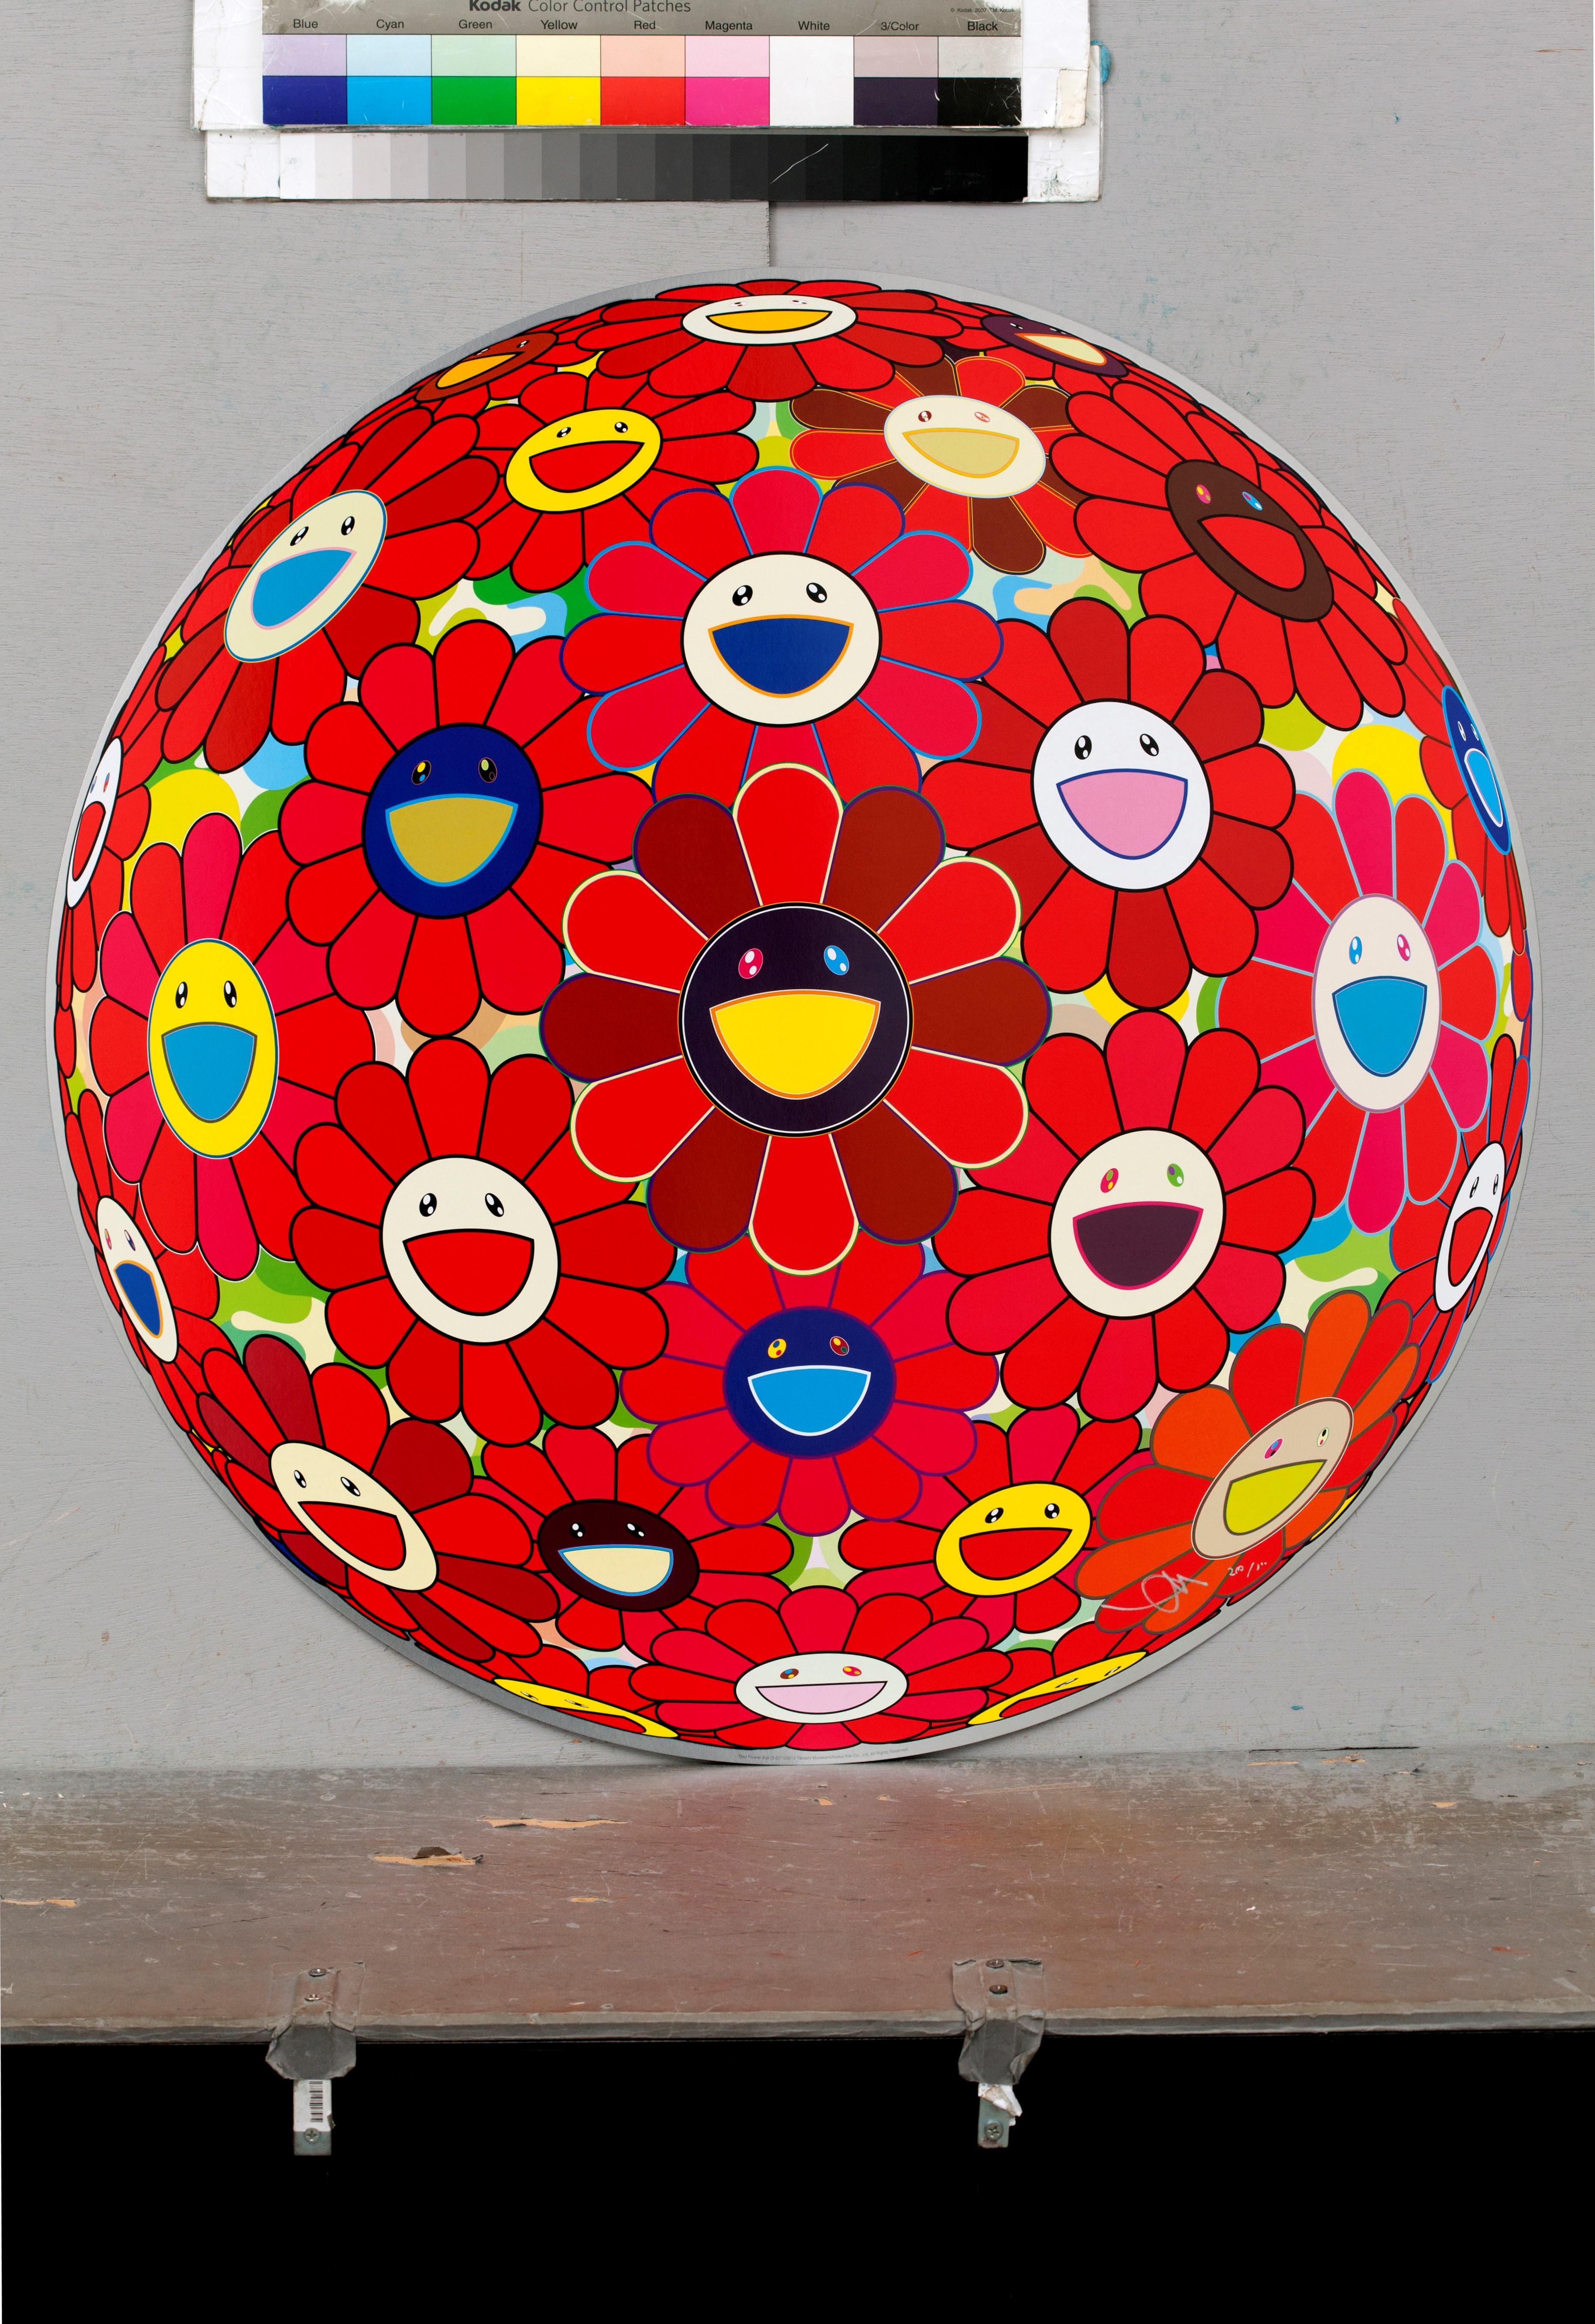 Red Flowerball. Limited Edition (print) by Takashi Murakami signed and numbered. 3